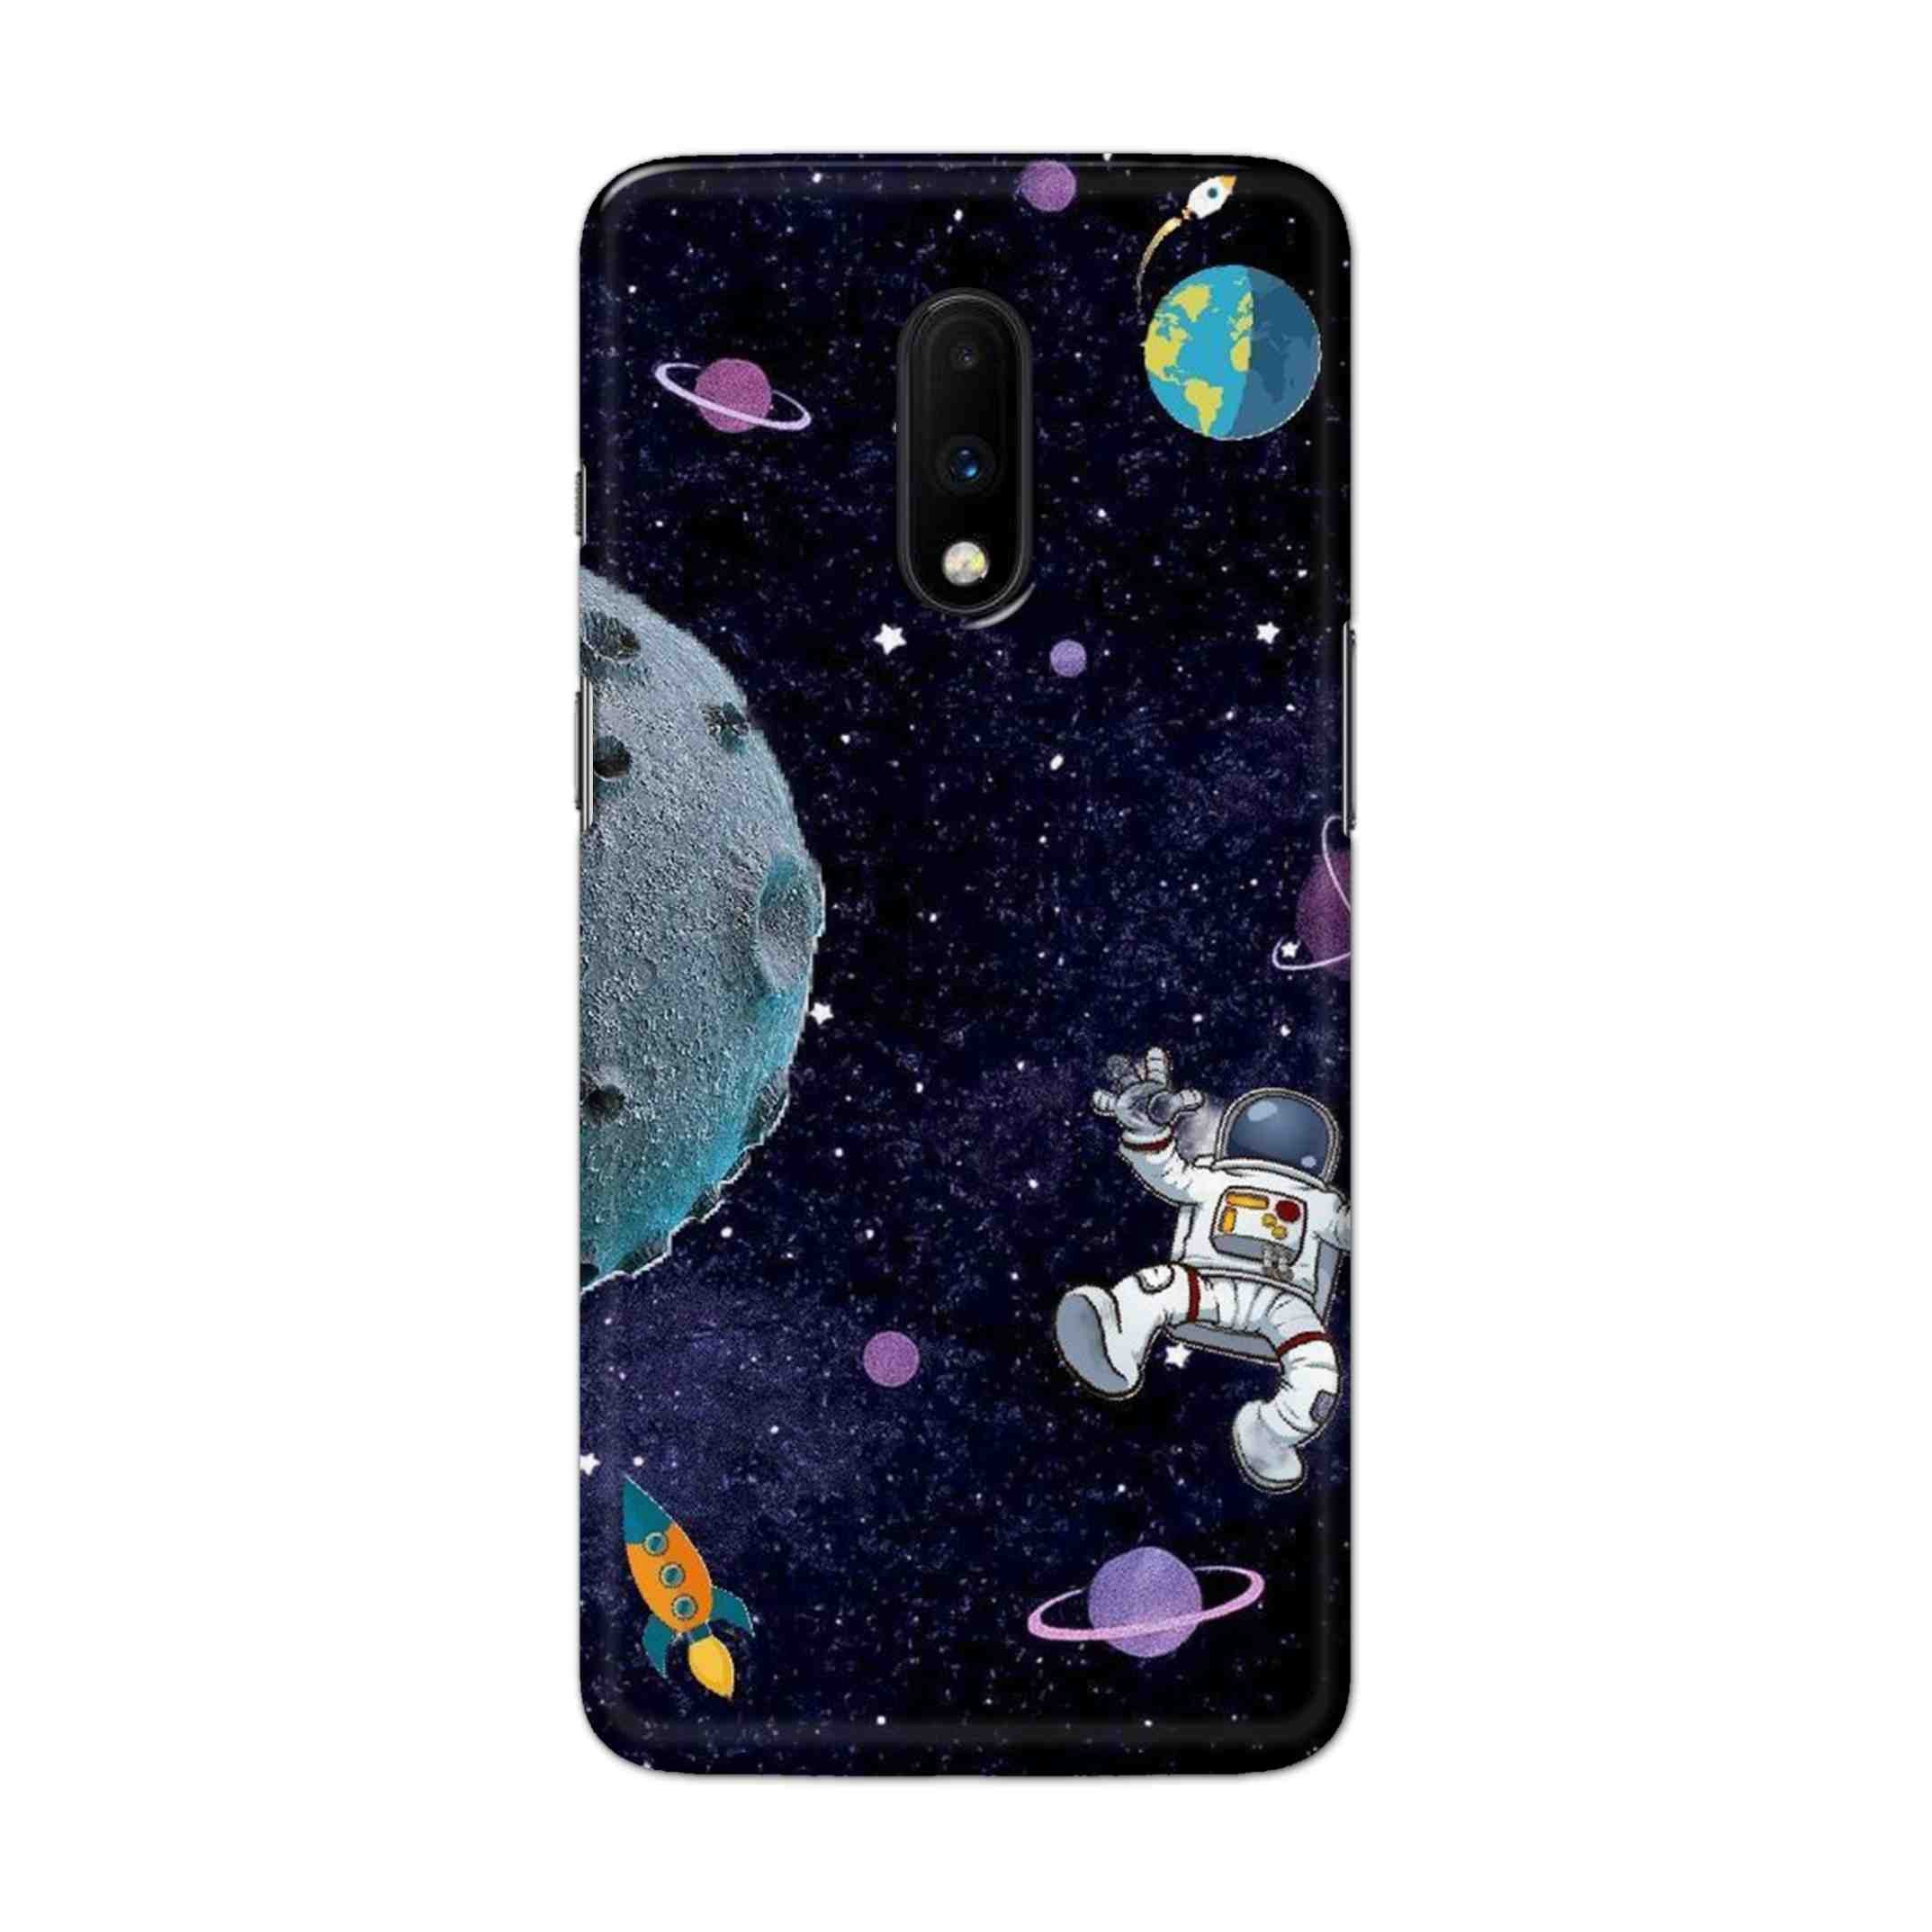 Buy Space Hard Back Mobile Phone Case Cover For OnePlus 7 Online